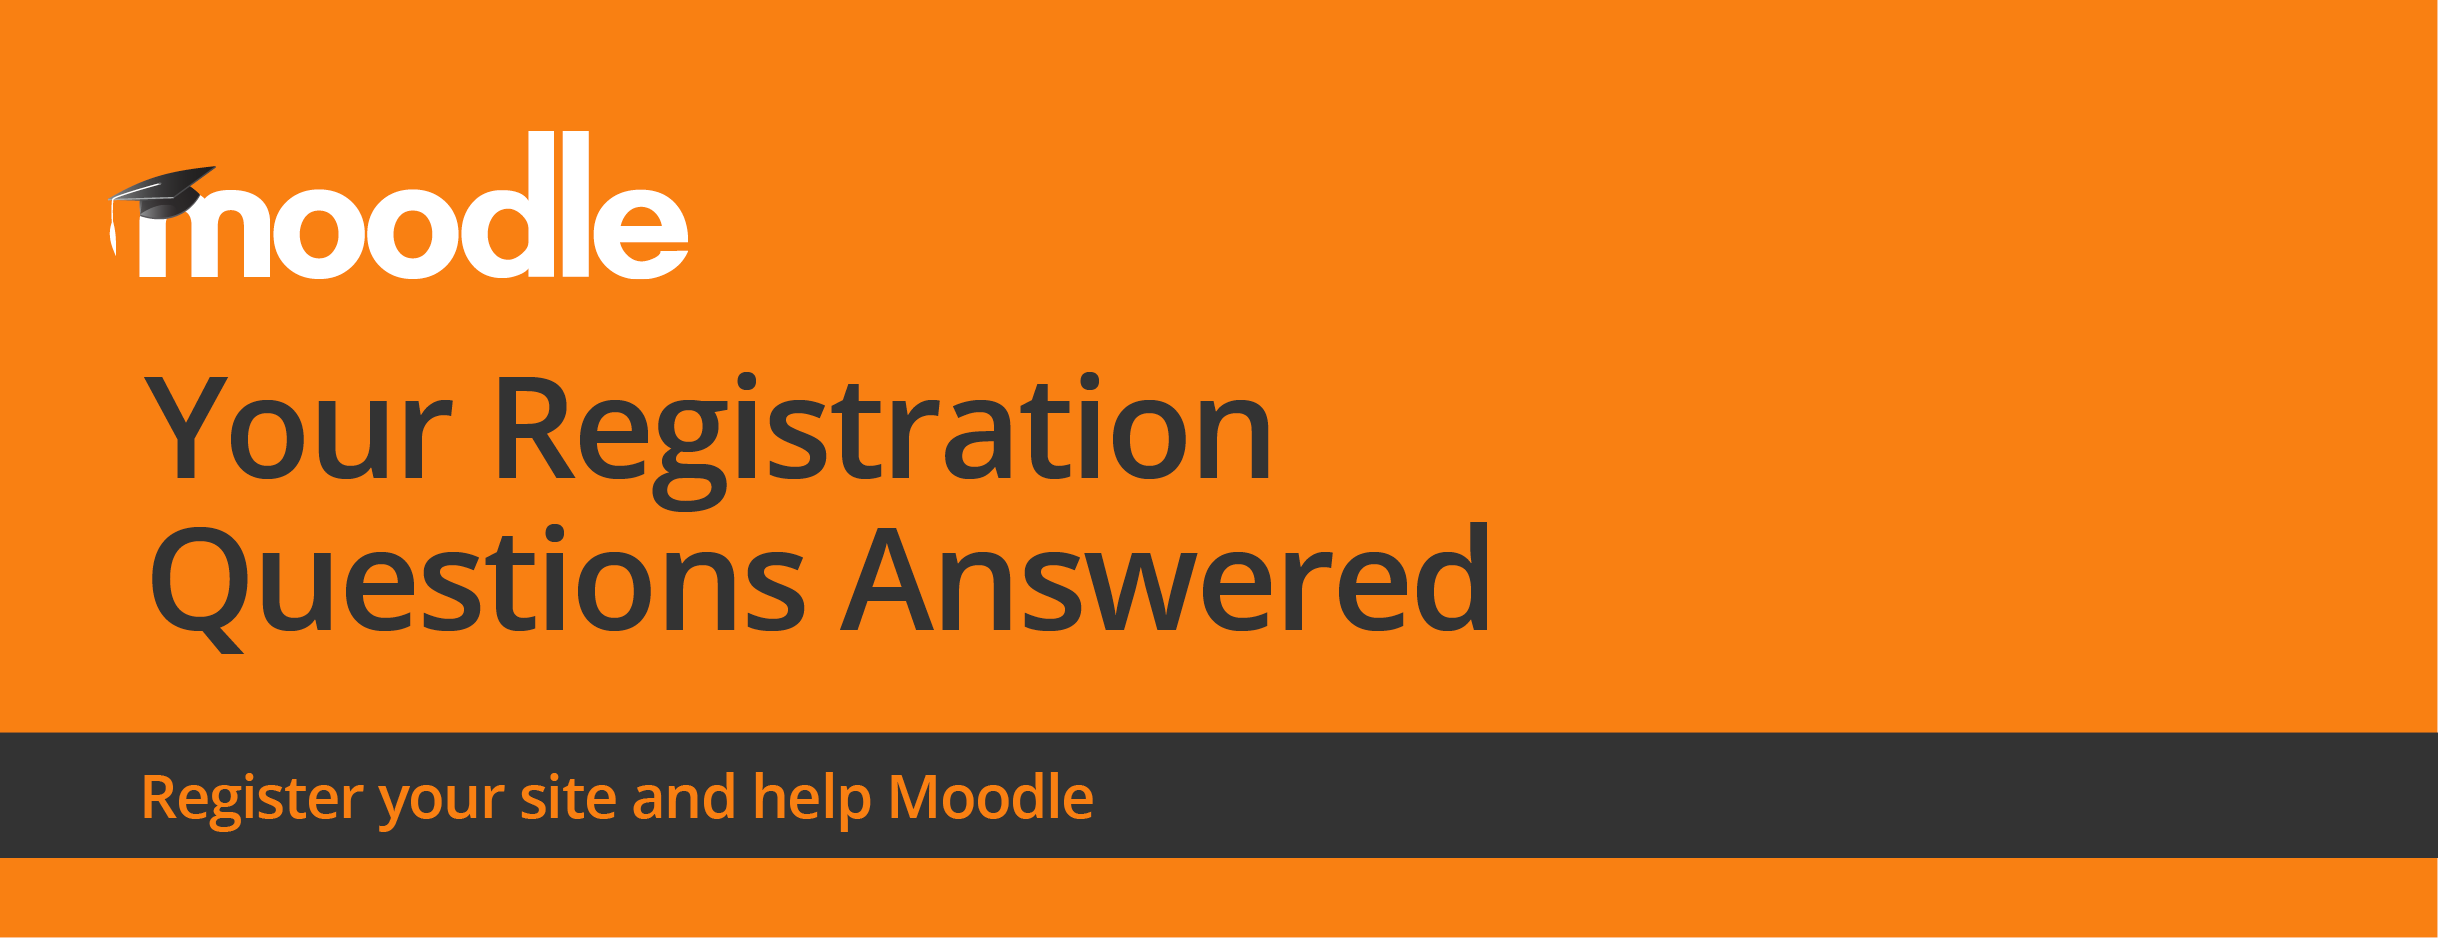 Your Registration Questions Answered Moodle